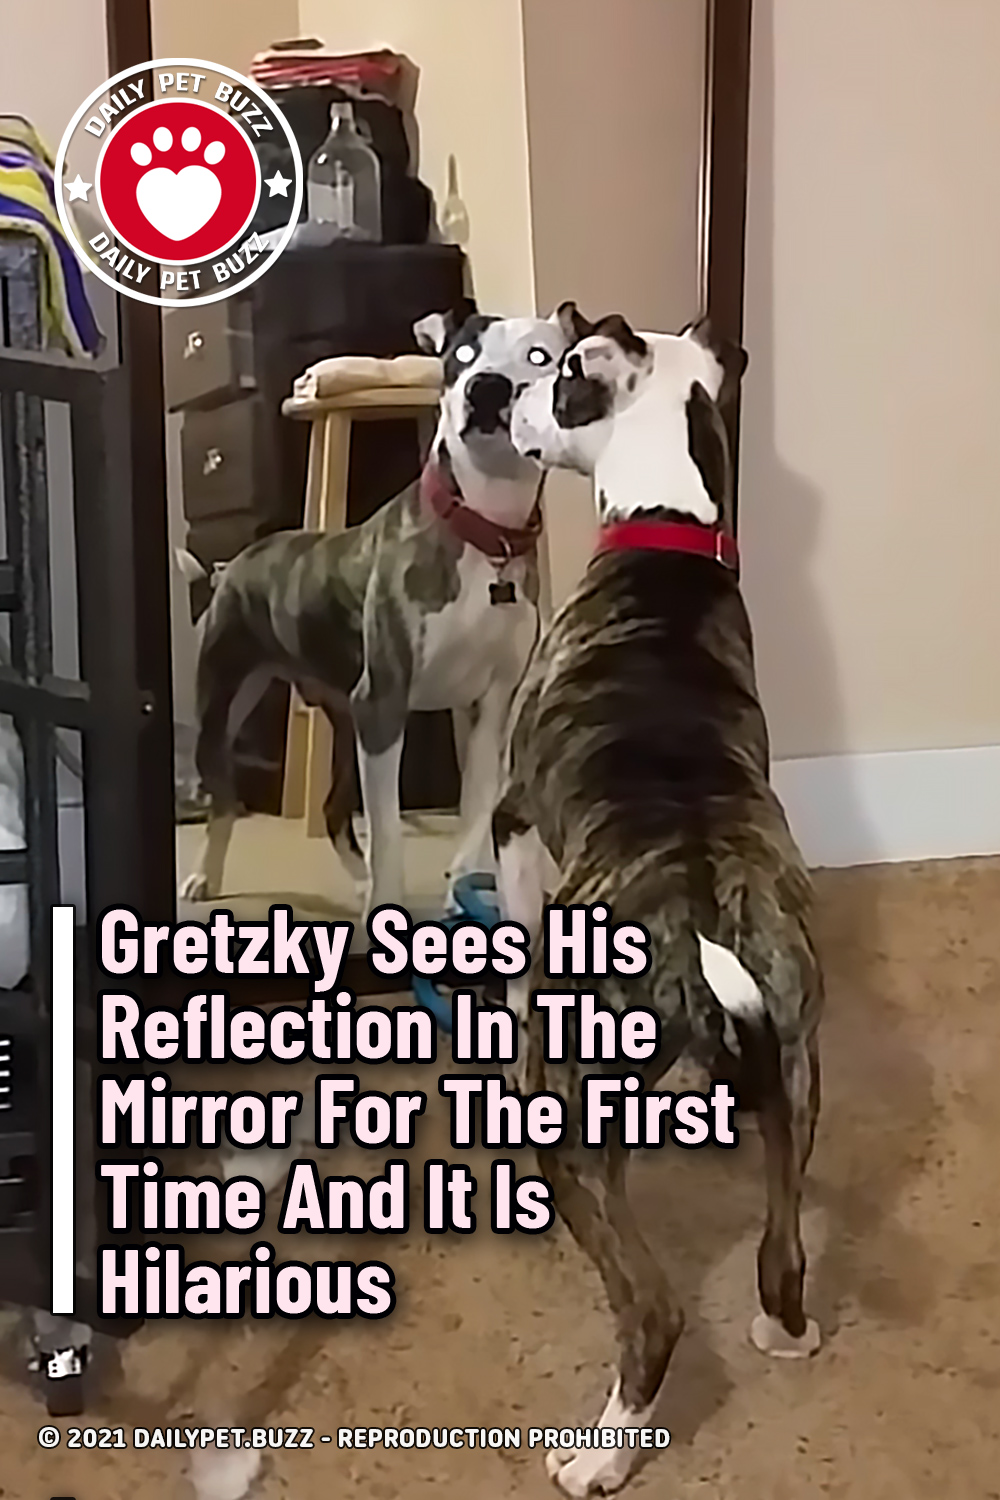 Gretzky Sees His Reflection In The Mirror For The First Time And It Is Hilarious